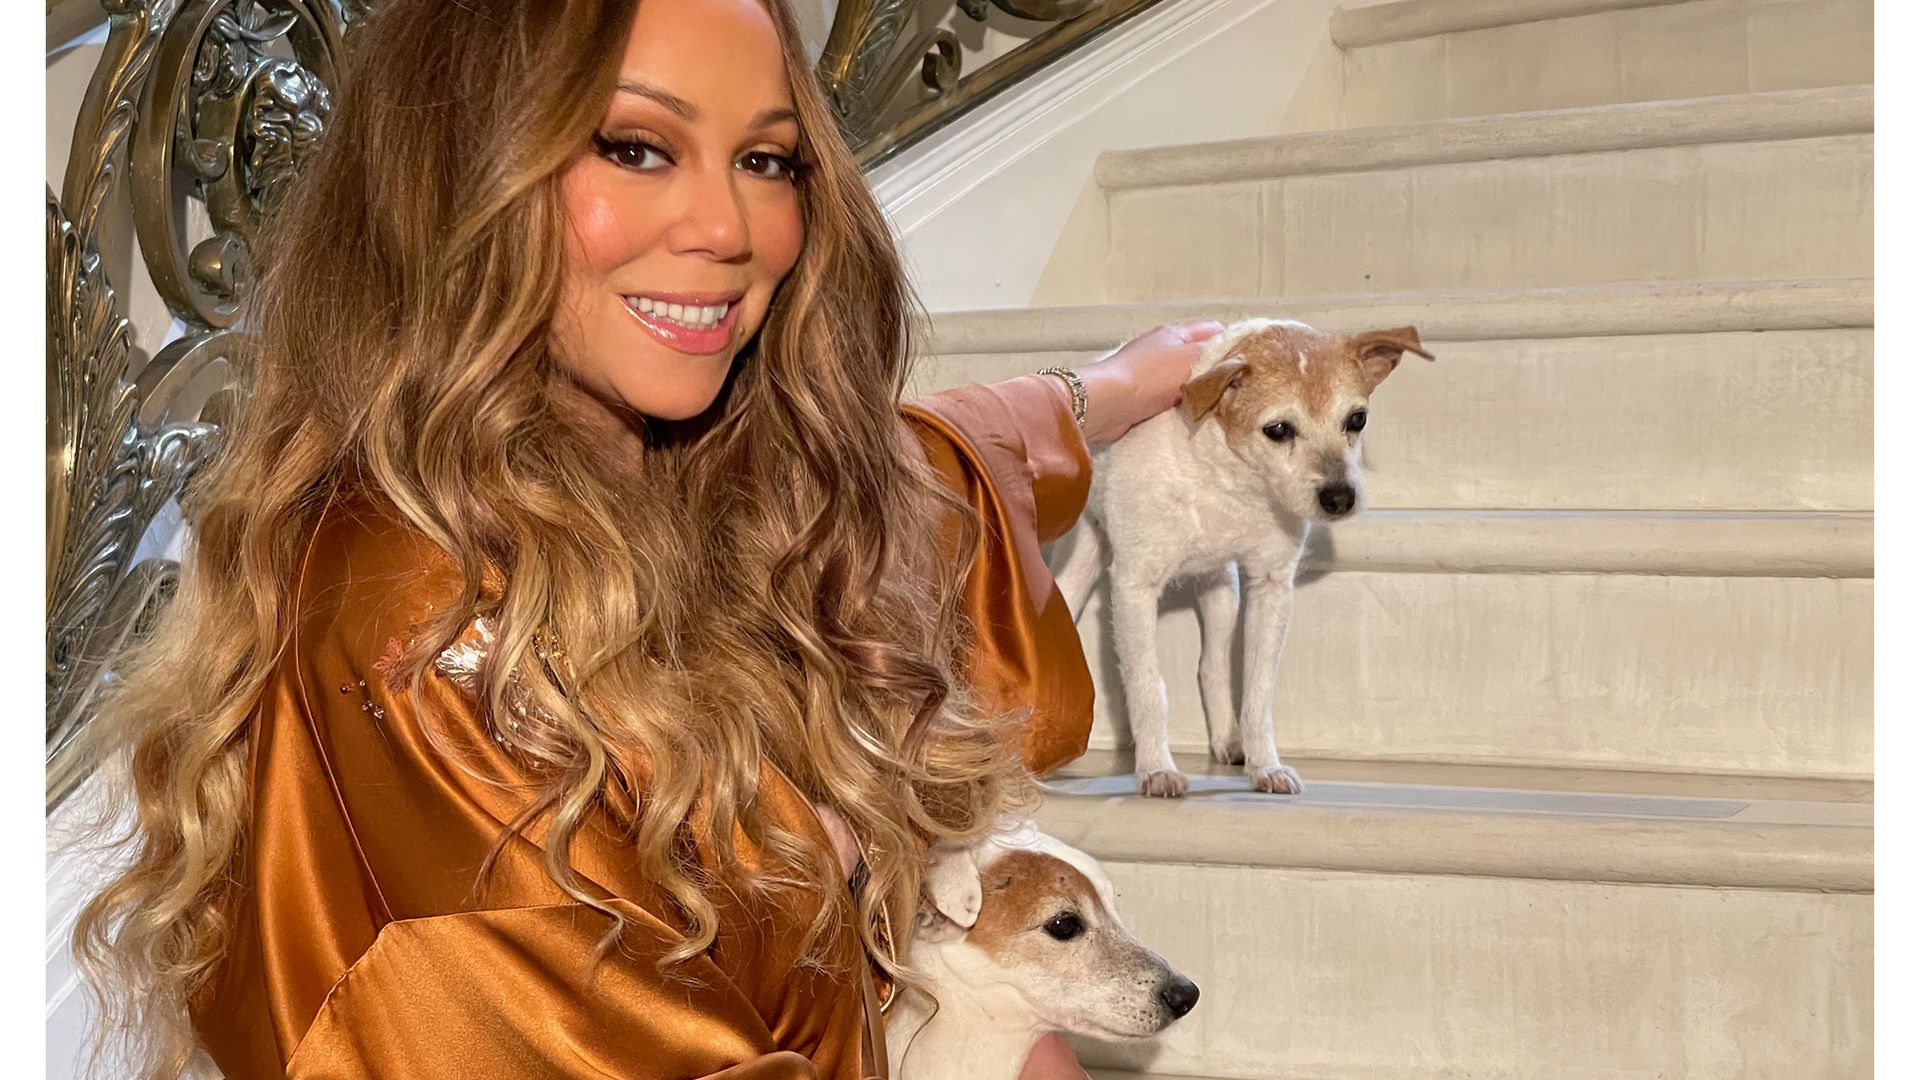 mariah carey on staircase with two dogs